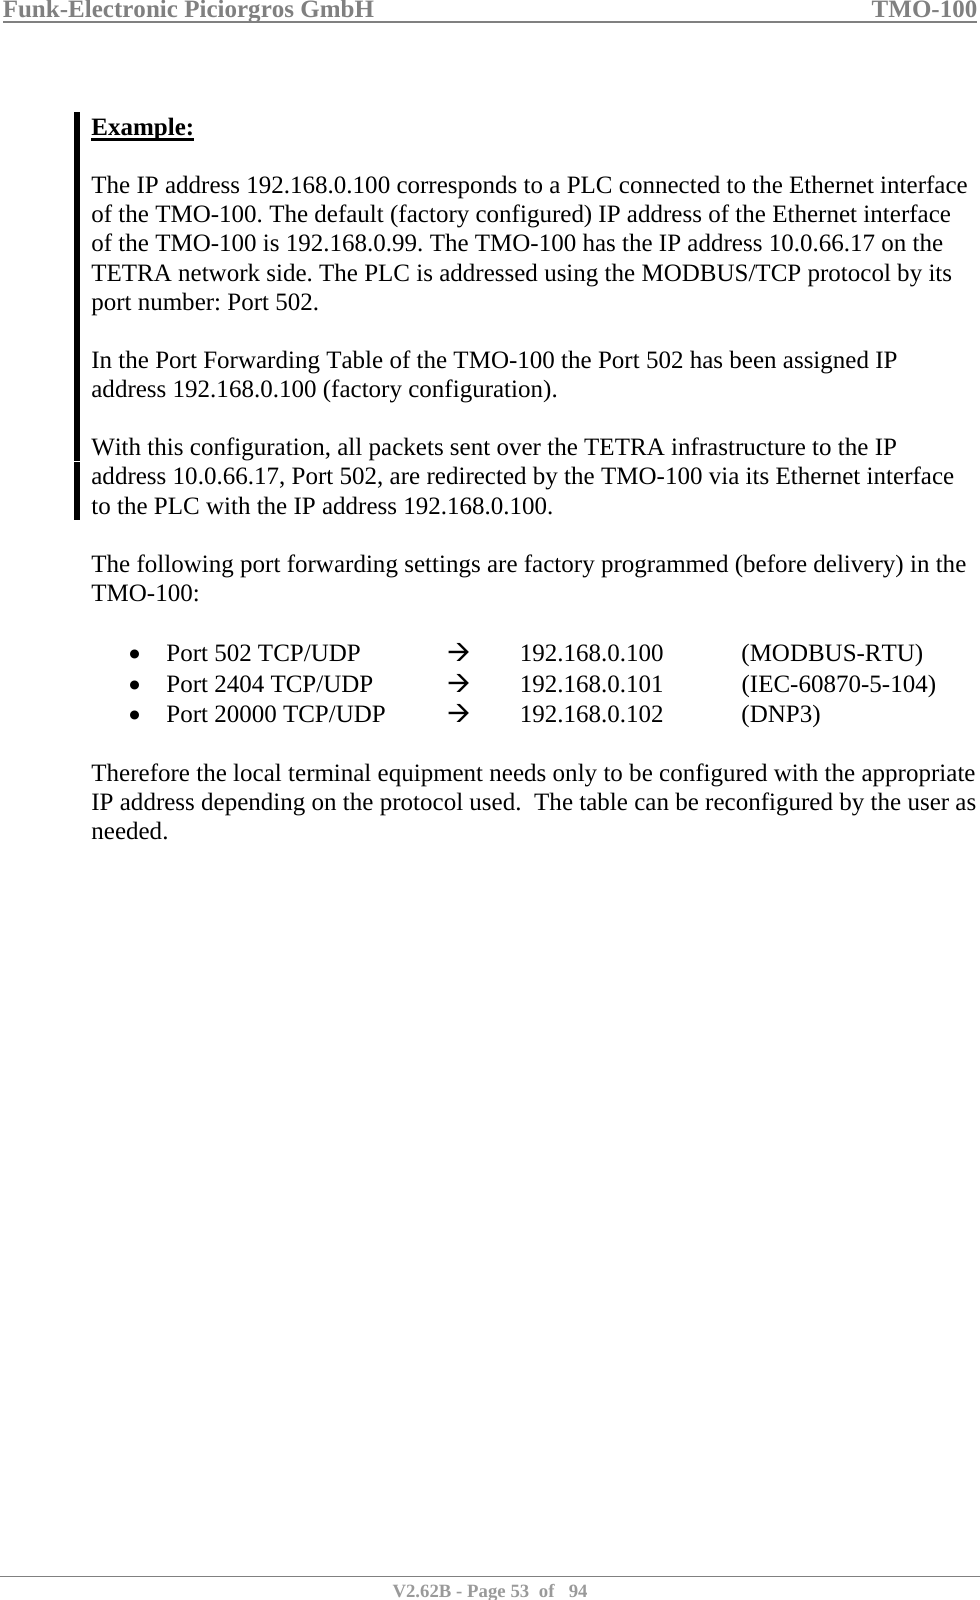 Funk-Electronic Piciorgros GmbH   TMO-100   V2.62B - Page 53  of   94    Example:  The IP address 192.168.0.100 corresponds to a PLC connected to the Ethernet interface of the TMO-100. The default (factory configured) IP address of the Ethernet interface of the TMO-100 is 192.168.0.99. The TMO-100 has the IP address 10.0.66.17 on the TETRA network side. The PLC is addressed using the MODBUS/TCP protocol by its port number: Port 502.   In the Port Forwarding Table of the TMO-100 the Port 502 has been assigned IP address 192.168.0.100 (factory configuration).   With this configuration, all packets sent over the TETRA infrastructure to the IP address 10.0.66.17, Port 502, are redirected by the TMO-100 via its Ethernet interface to the PLC with the IP address 192.168.0.100.  The following port forwarding settings are factory programmed (before delivery) in the TMO-100:  • Port 502 TCP/UDP    Æ   192.168.0.100   (MODBUS-RTU) • Port 2404 TCP/UDP   Æ   192.168.0.101   (IEC-60870-5-104) • Port 20000 TCP/UDP   Æ   192.168.0.102   (DNP3)  Therefore the local terminal equipment needs only to be configured with the appropriate IP address depending on the protocol used.  The table can be reconfigured by the user as needed.   